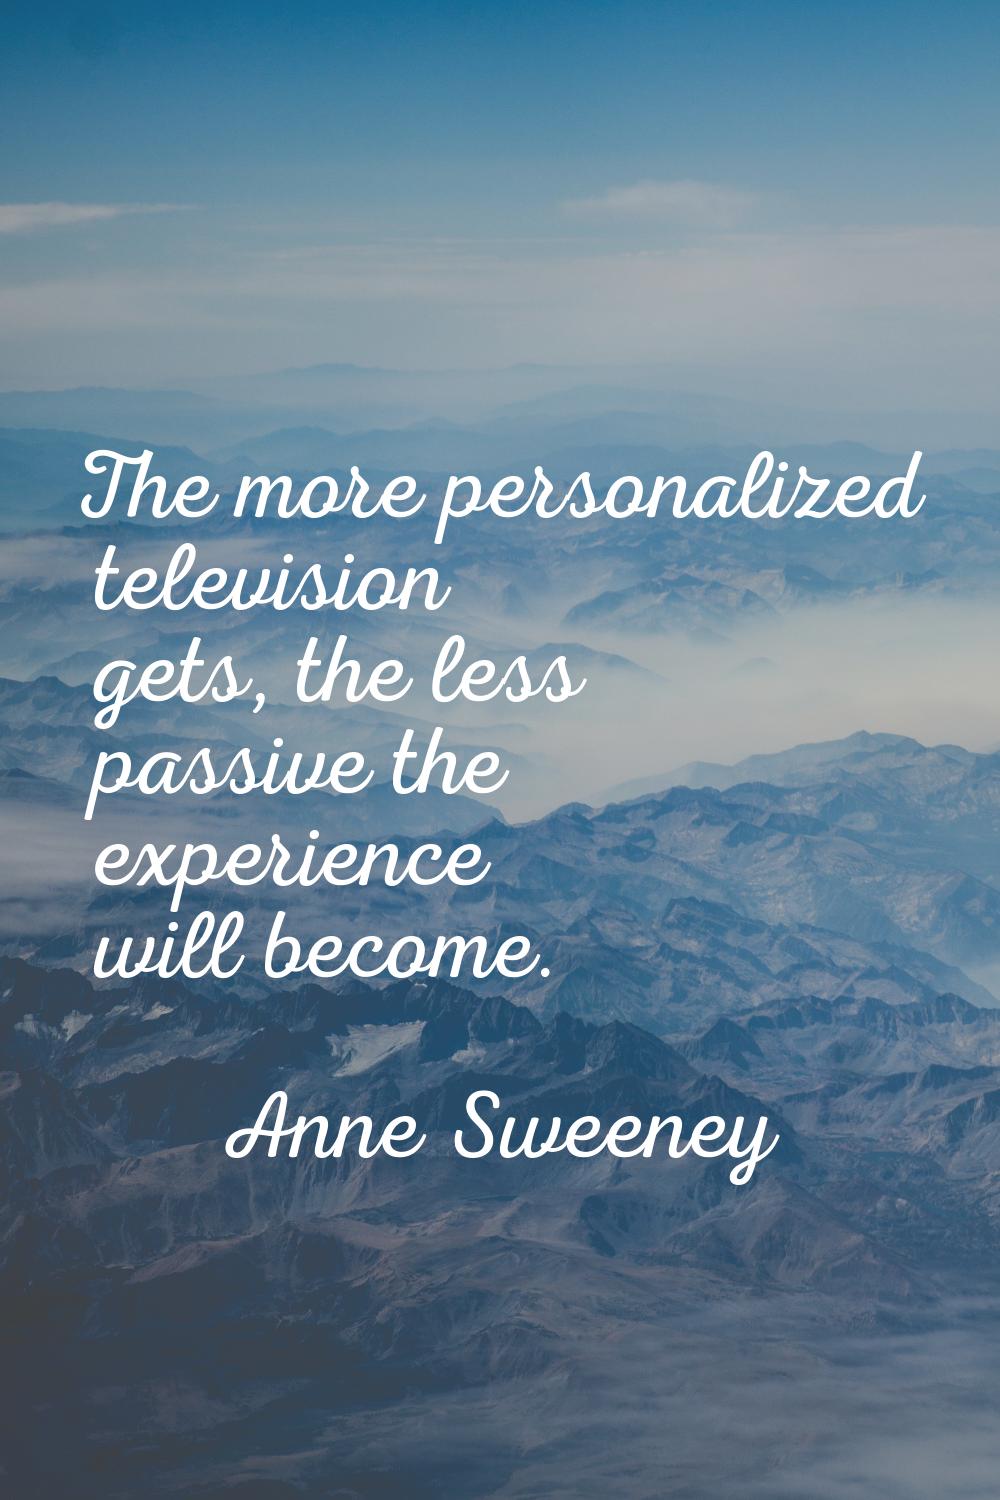 The more personalized television gets, the less passive the experience will become.